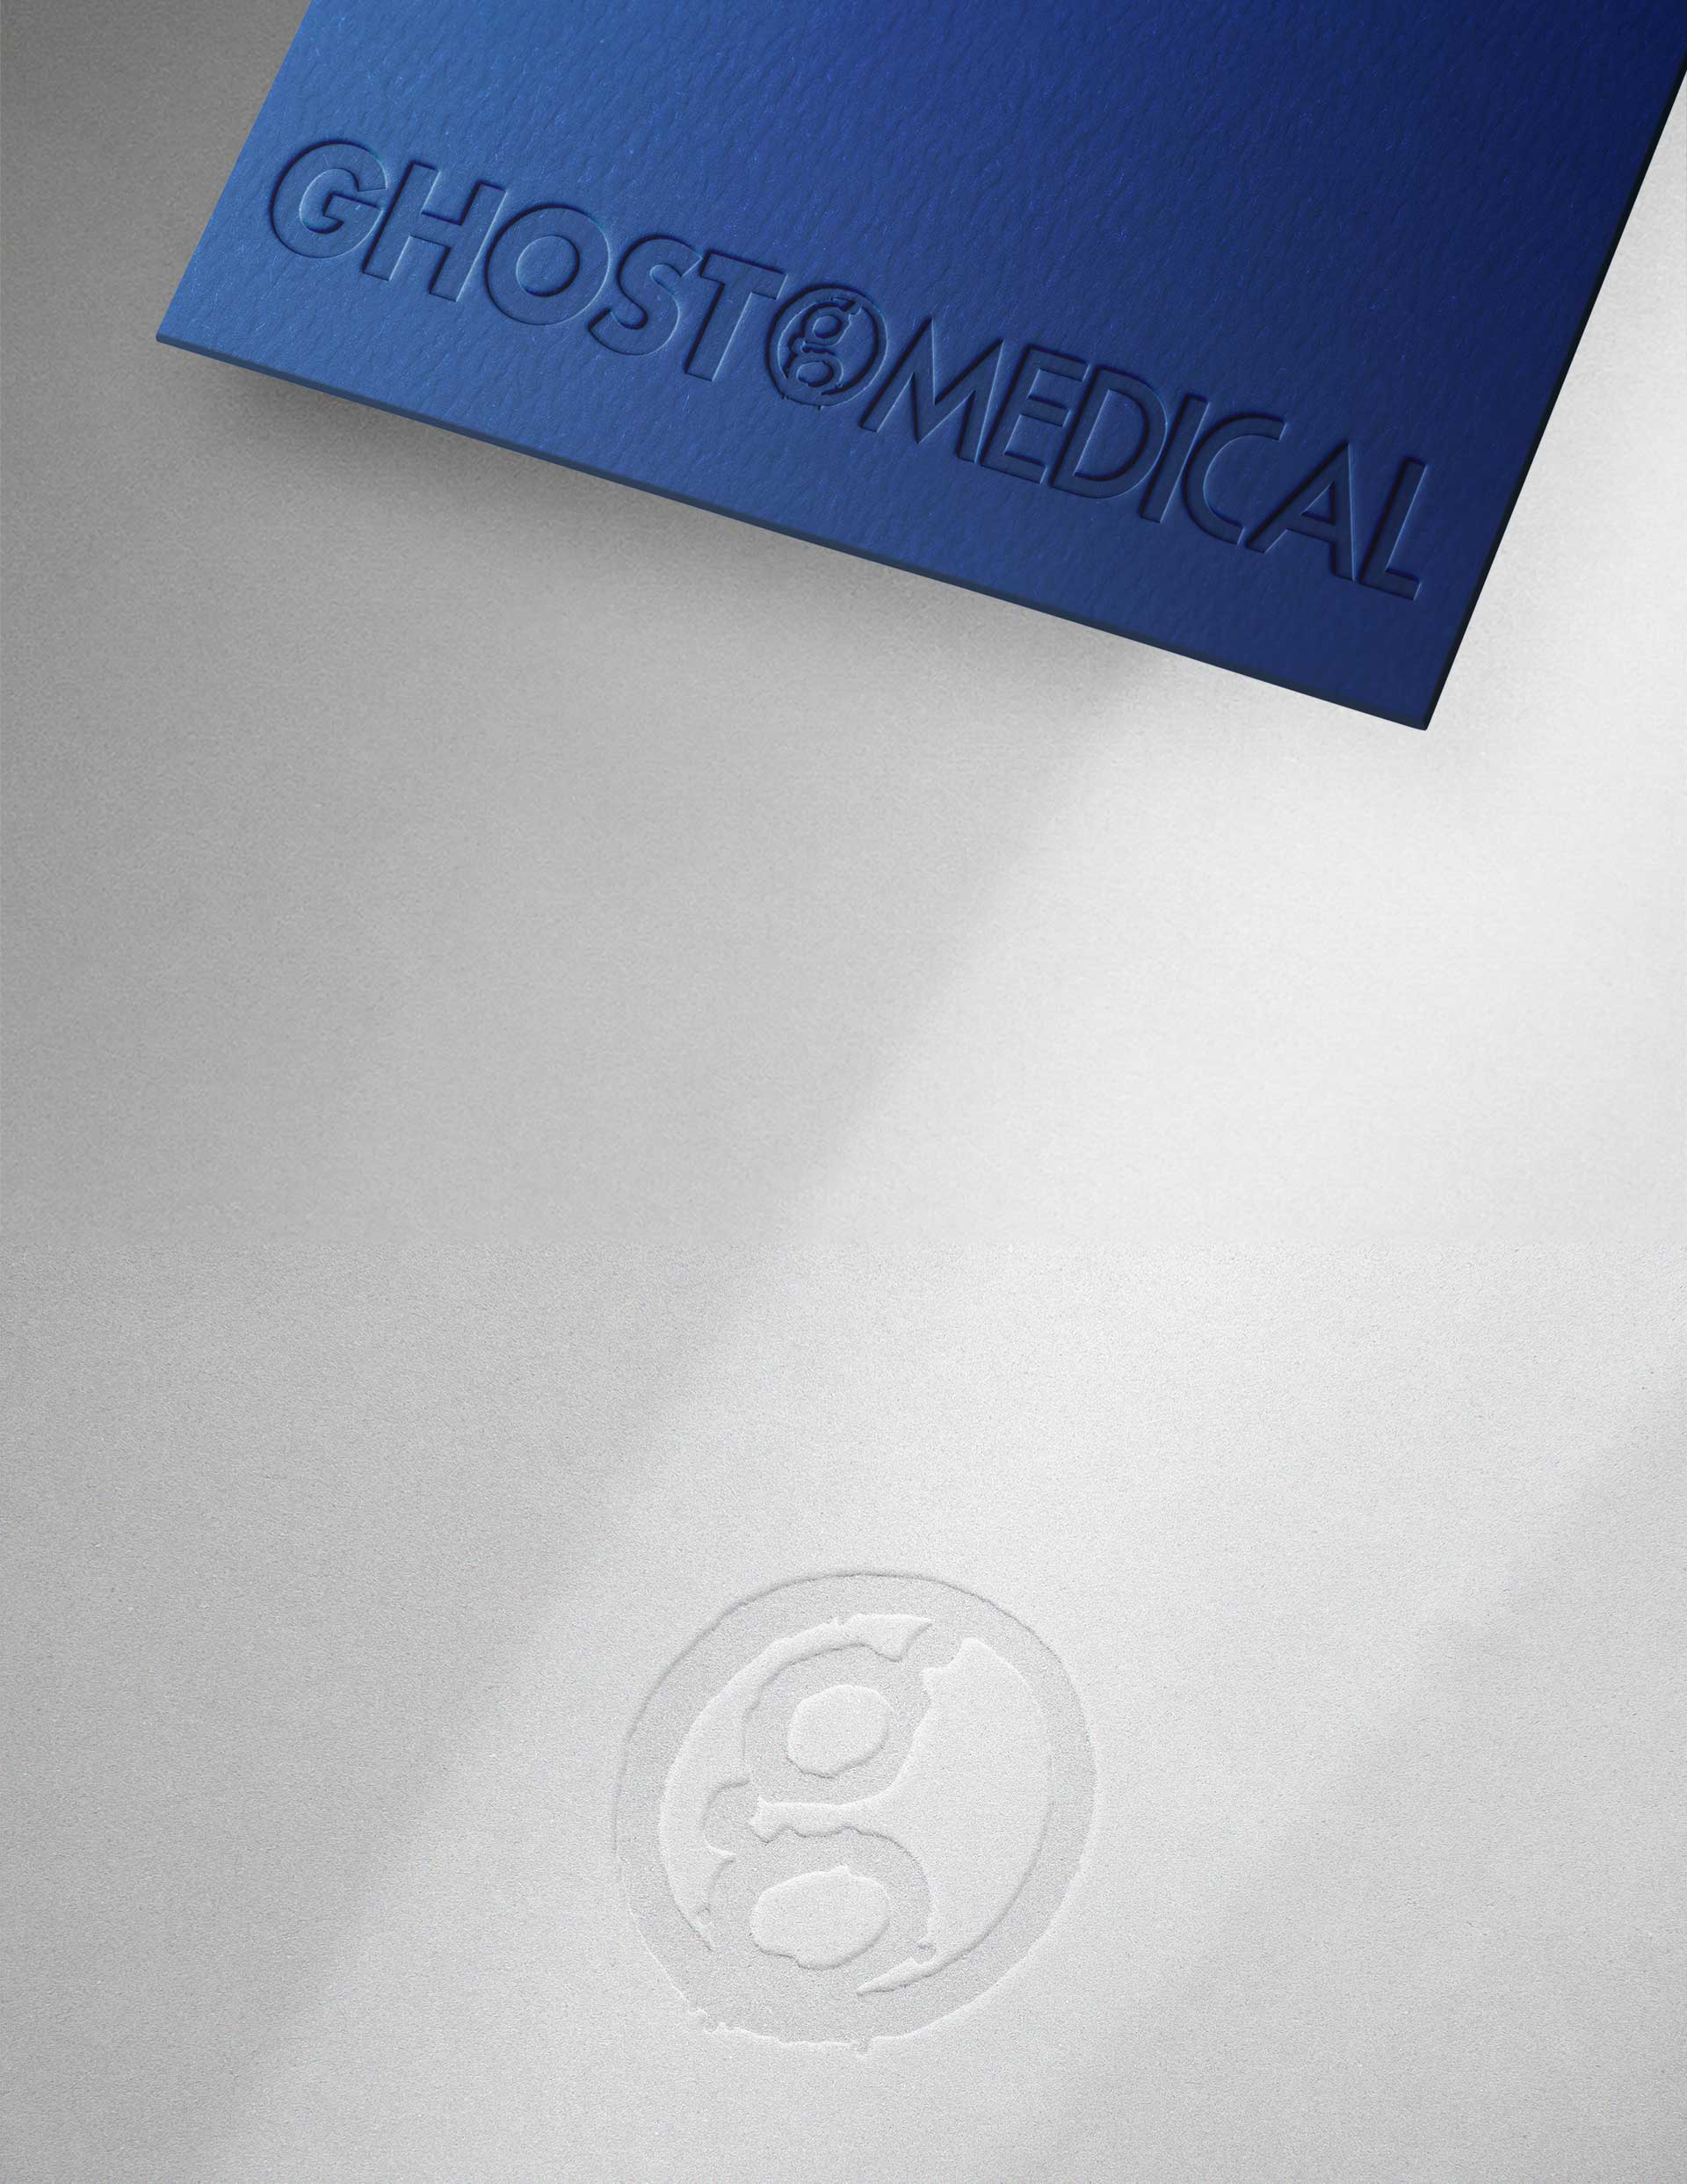 Ghost Medical logo stamped into paper